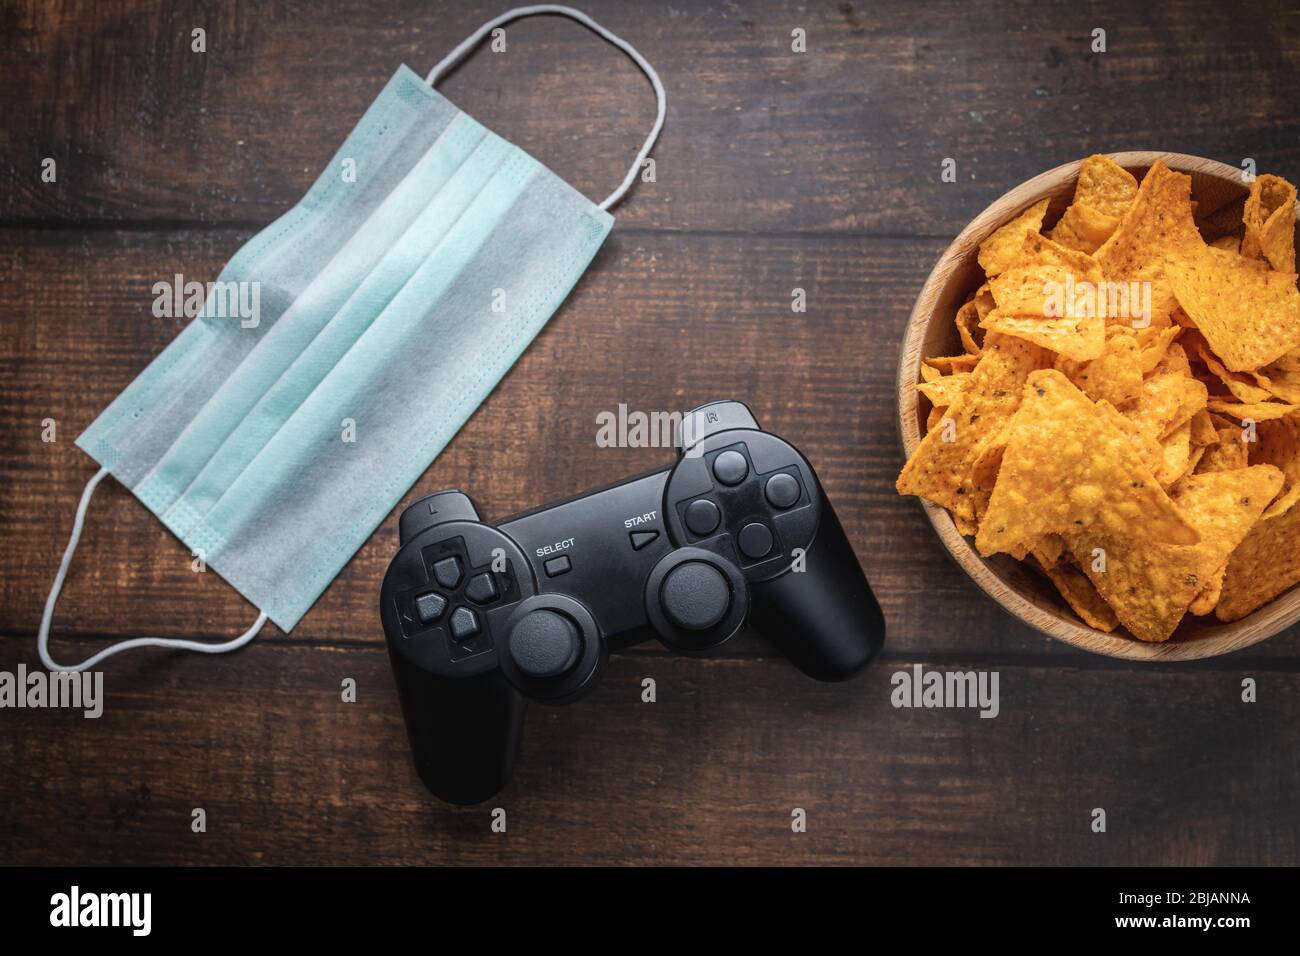 Game console rc, bowl of crisps and medical mask on wooden table. Coronavirus Covid-19 quarantine stay at home concept. Stock Photo